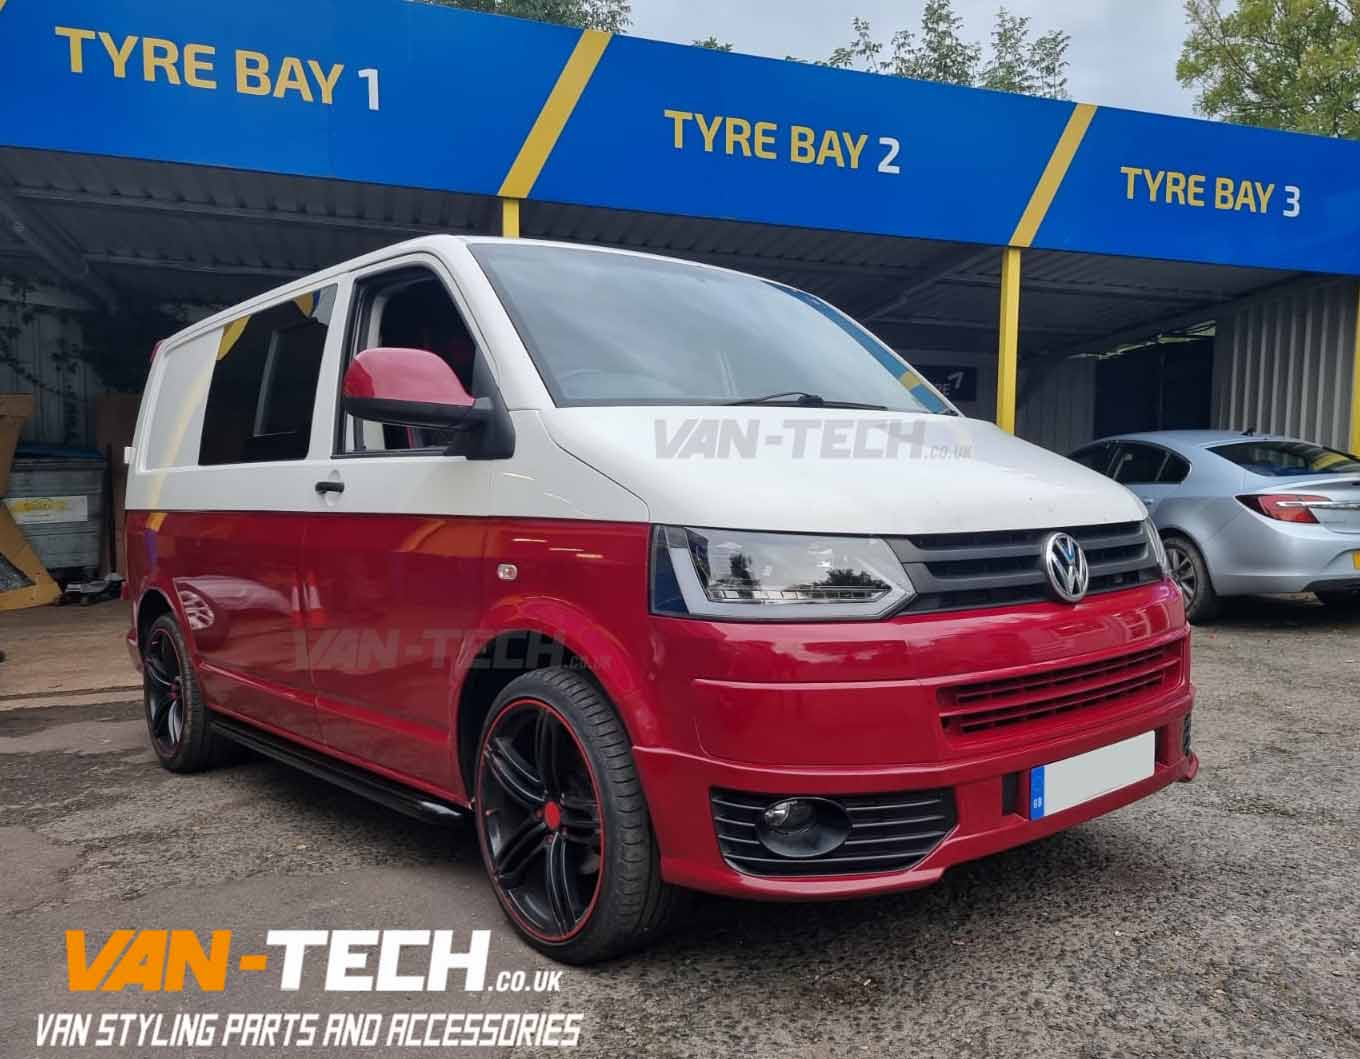 VW Transporter T5.1 Parts and Accessories Lights, Sportline Bumper, Side Bars, Rear Spoiler, Interior Curtain and more